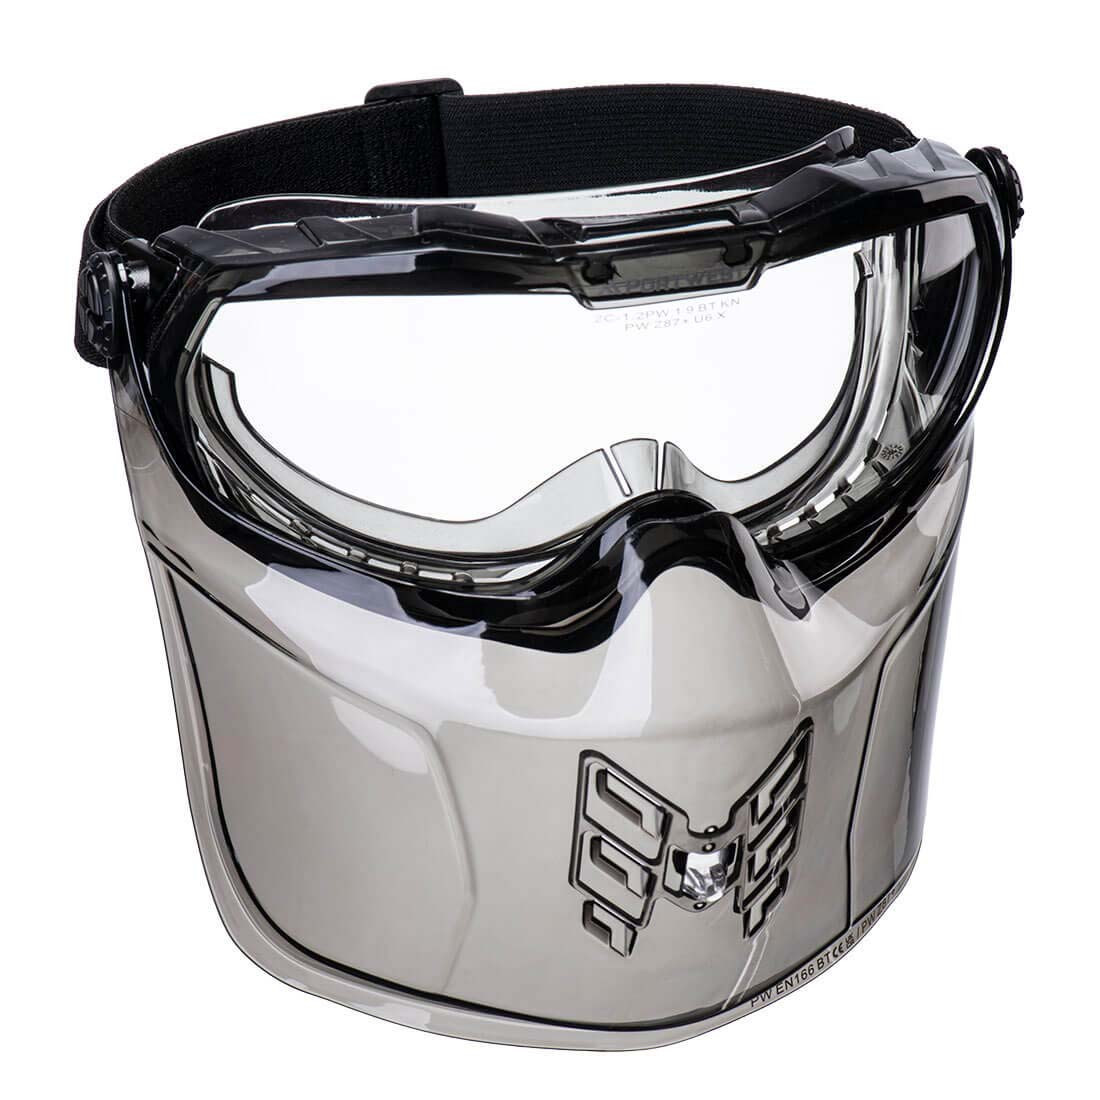 Ultra Safe Goggles - Personal protection